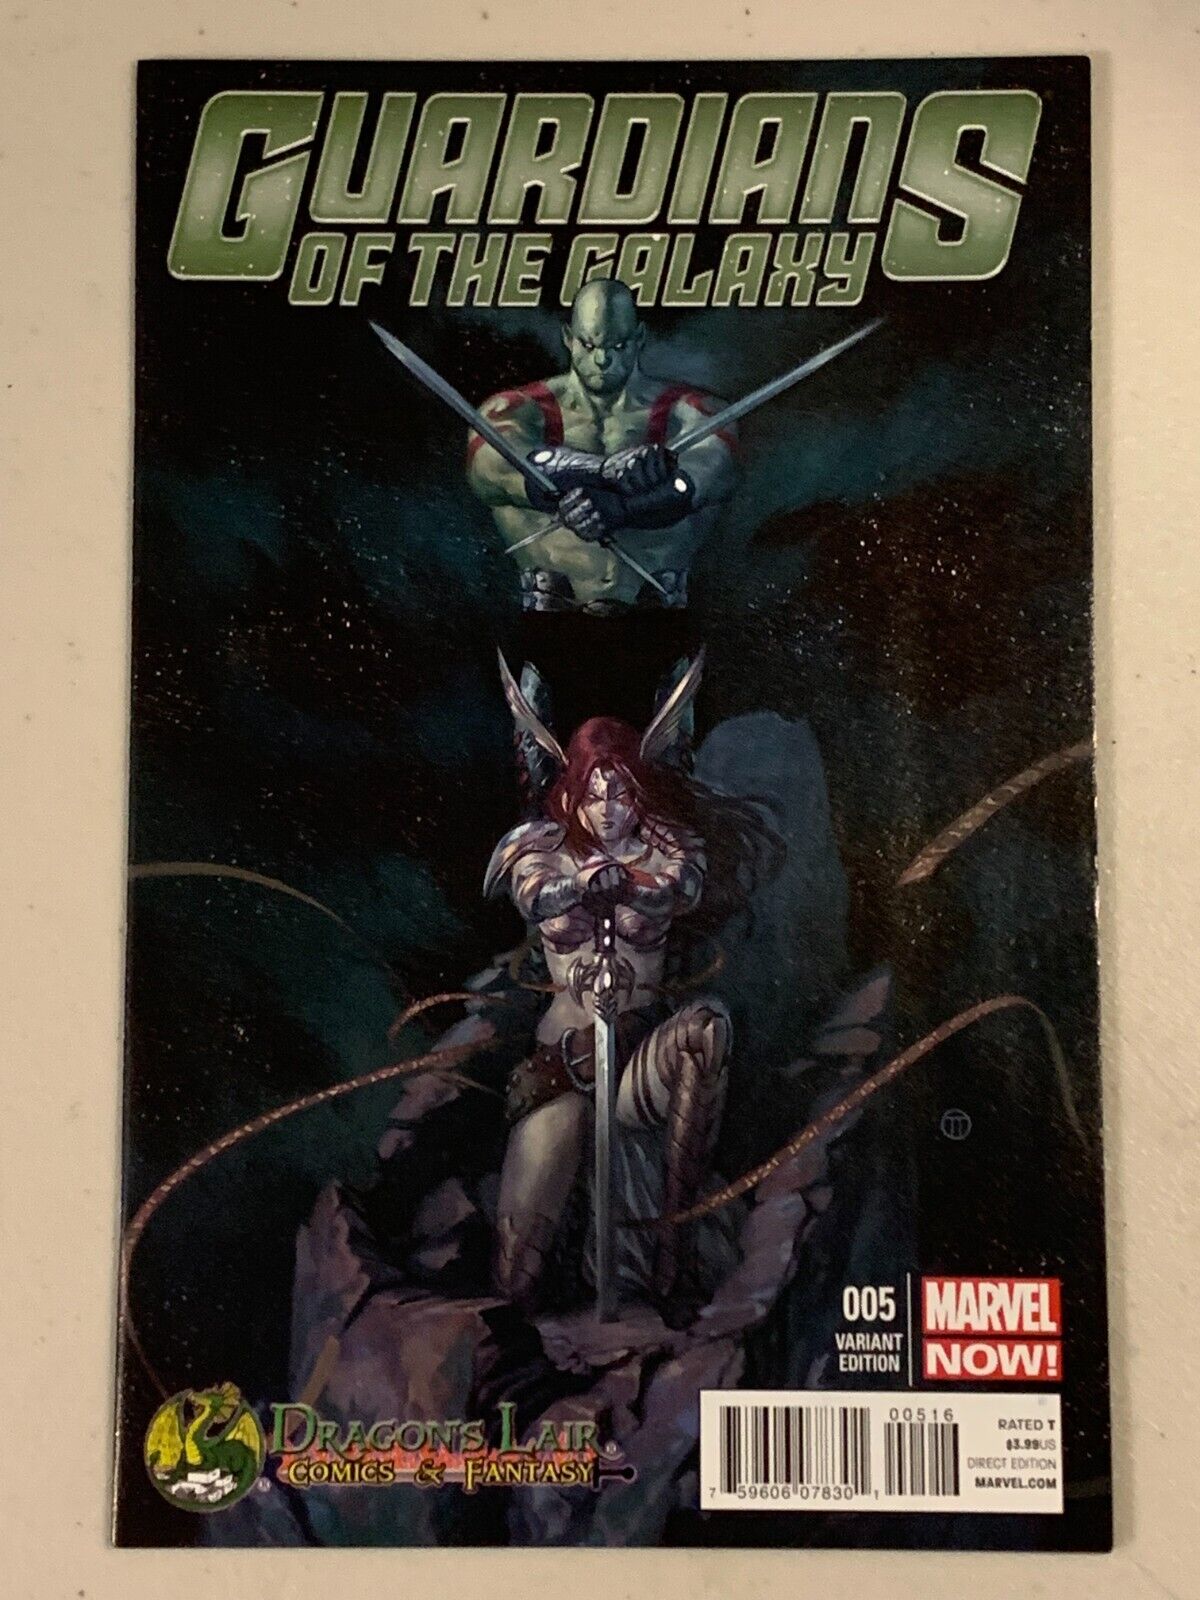 GUARDIANS OF THE GALAXY #5 NM RARE DRAGONS LAIR VARIANT 1ST APPEARANCE ANGELA